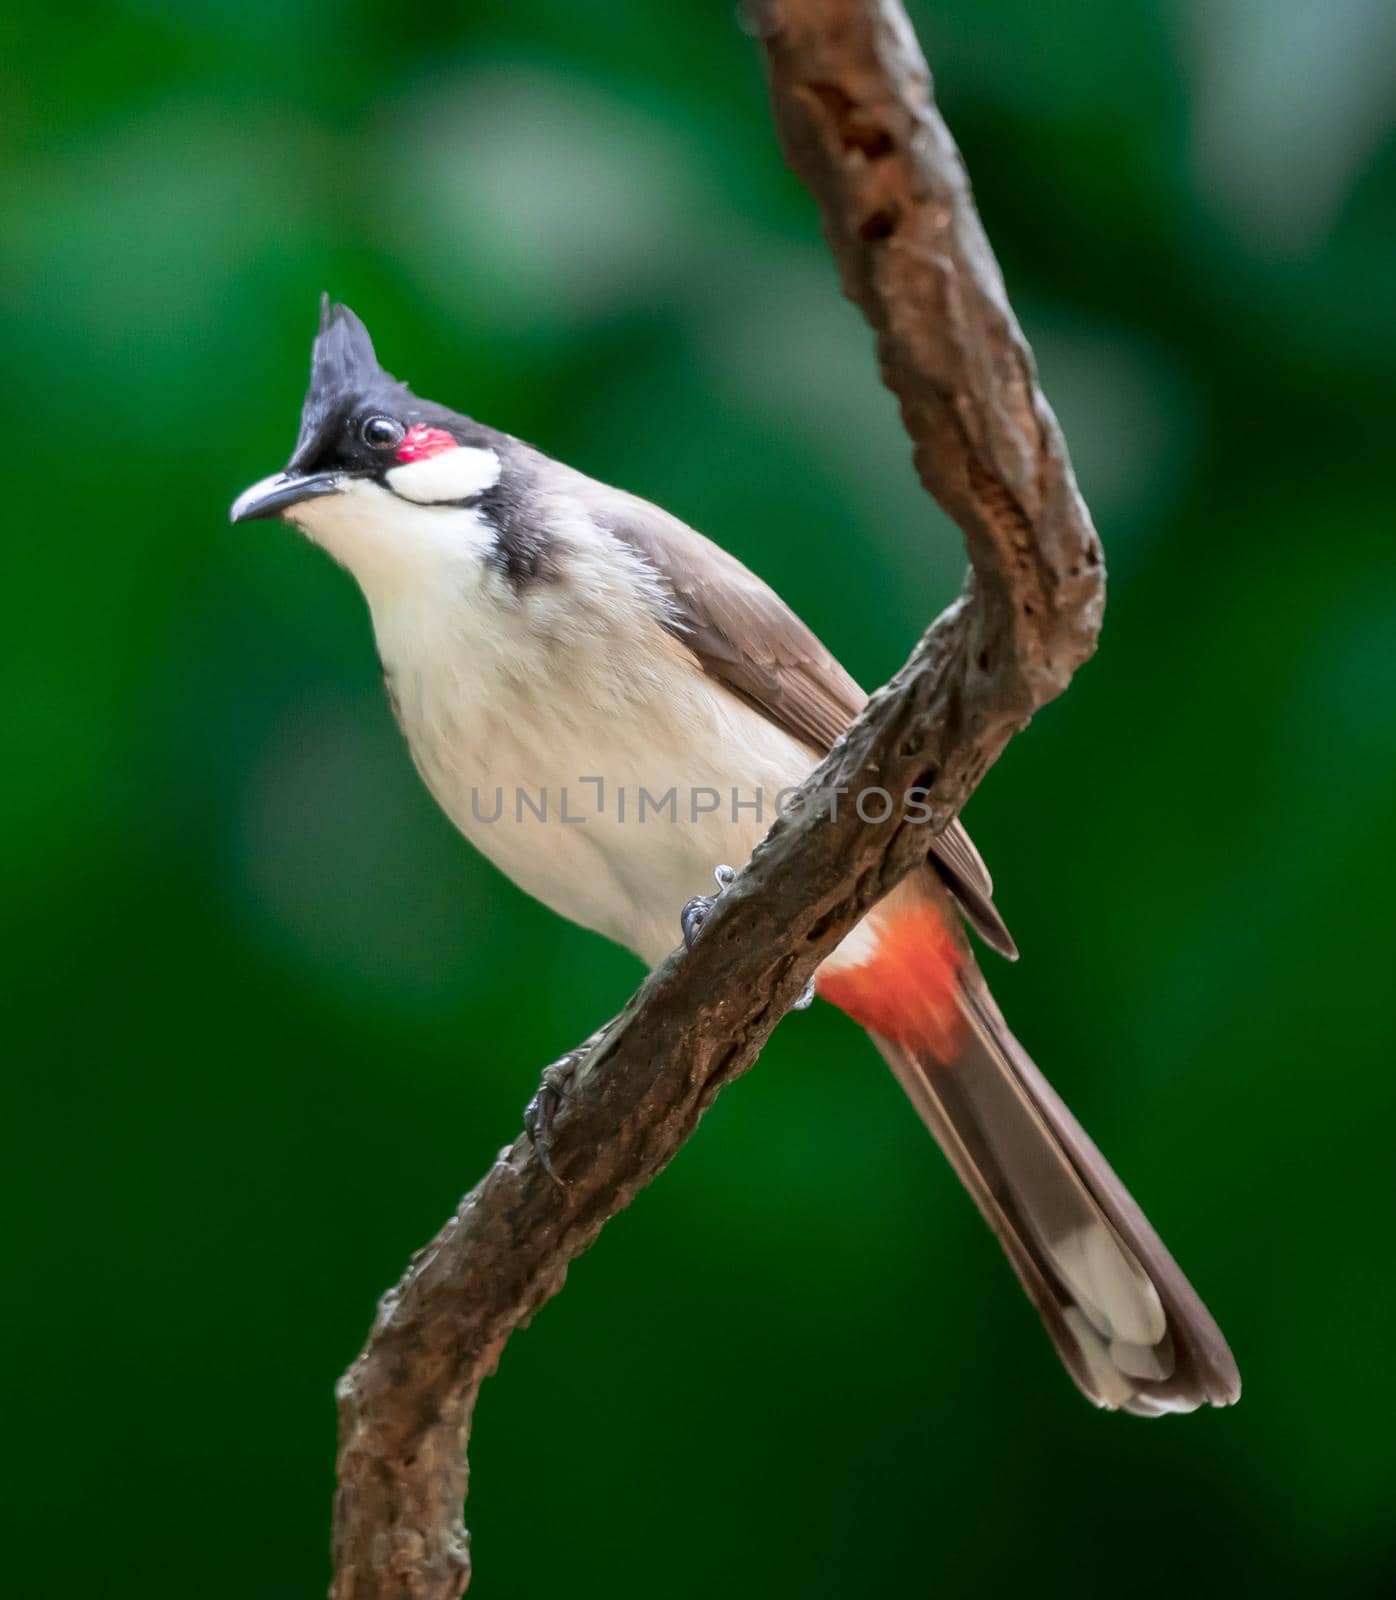 A Red-whiskered Bulbul bird is a passerine bird found in Asia